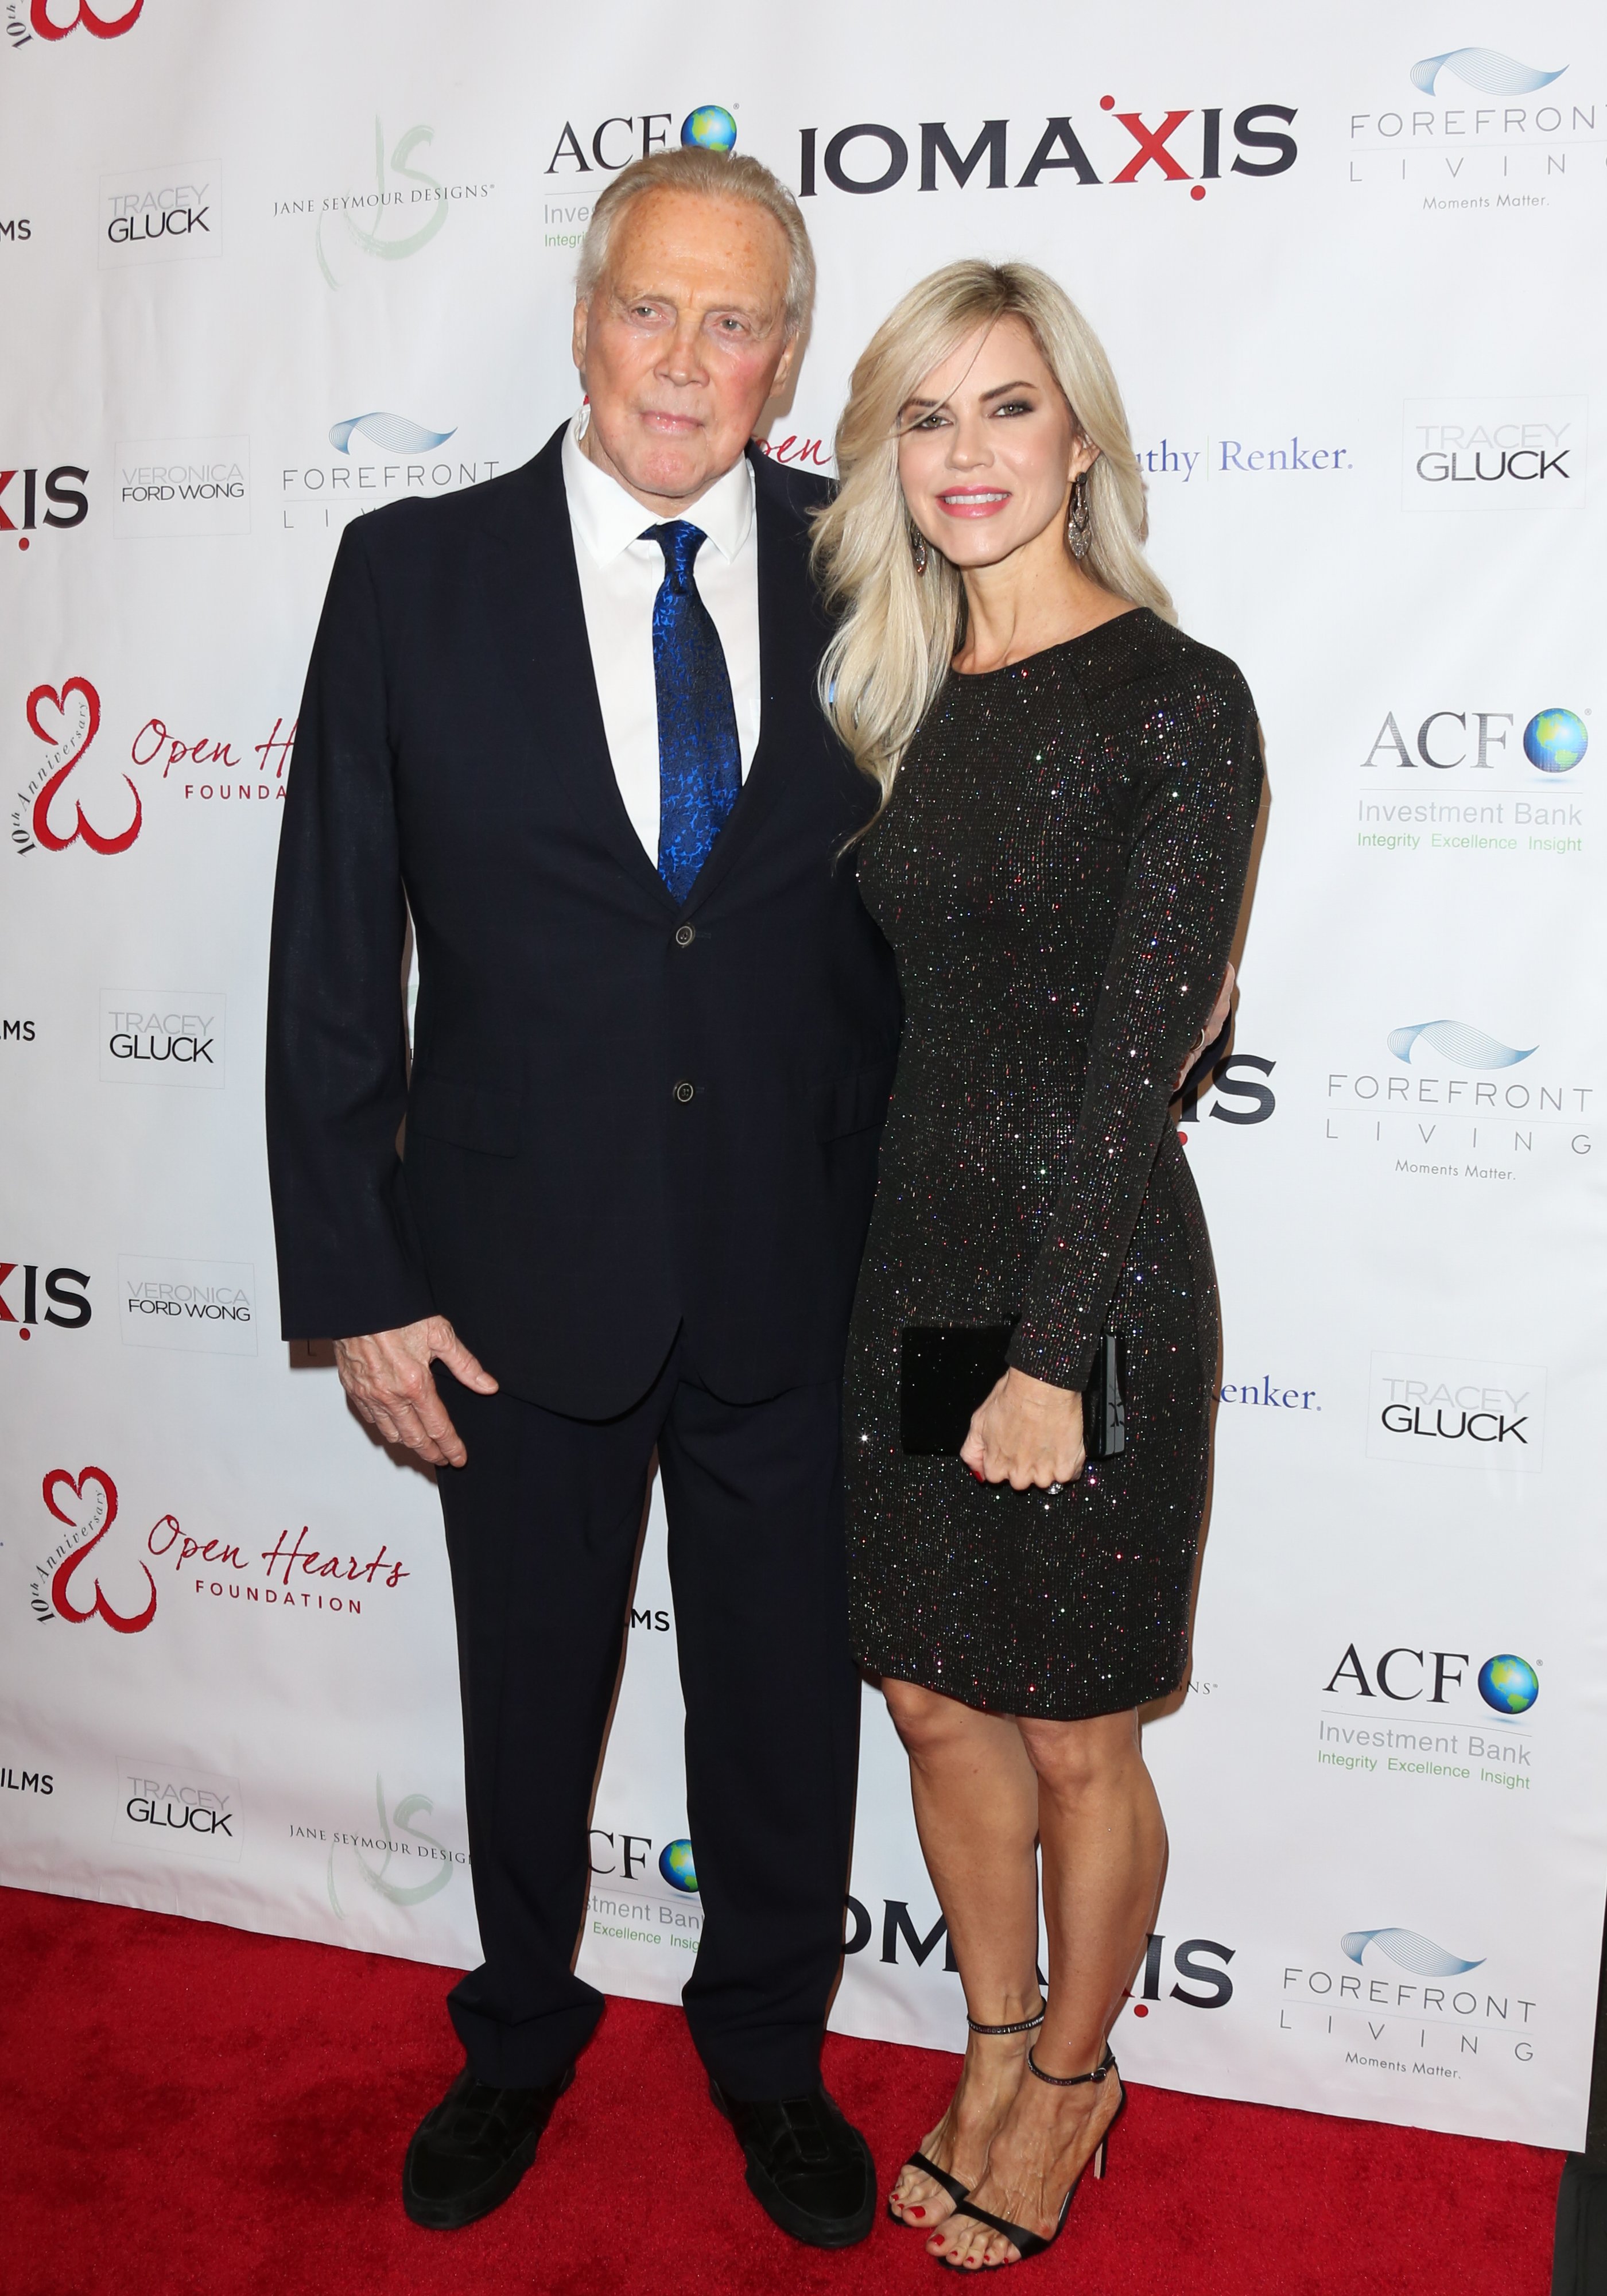 Actors Lee Majors (L) and Faith Majors (R) attend the Open Hearts Foundation 10th Anniversary Gala at SLS Hotel at Beverly Hills on February 15, 2020 in Los Angeles, California. | Source: Getty Images